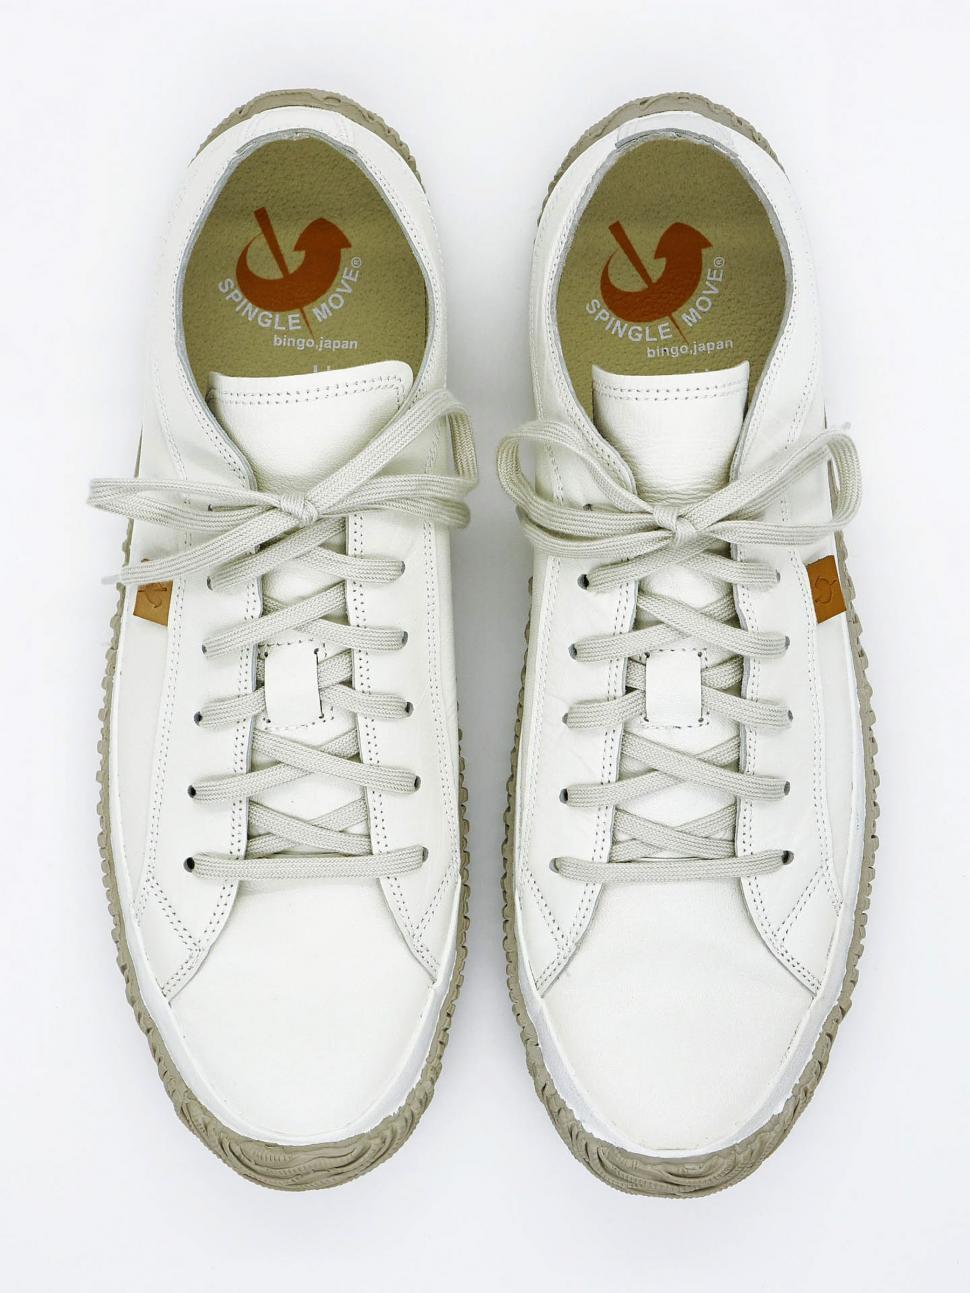 Free Image of White Sneakers With Brown Logo 